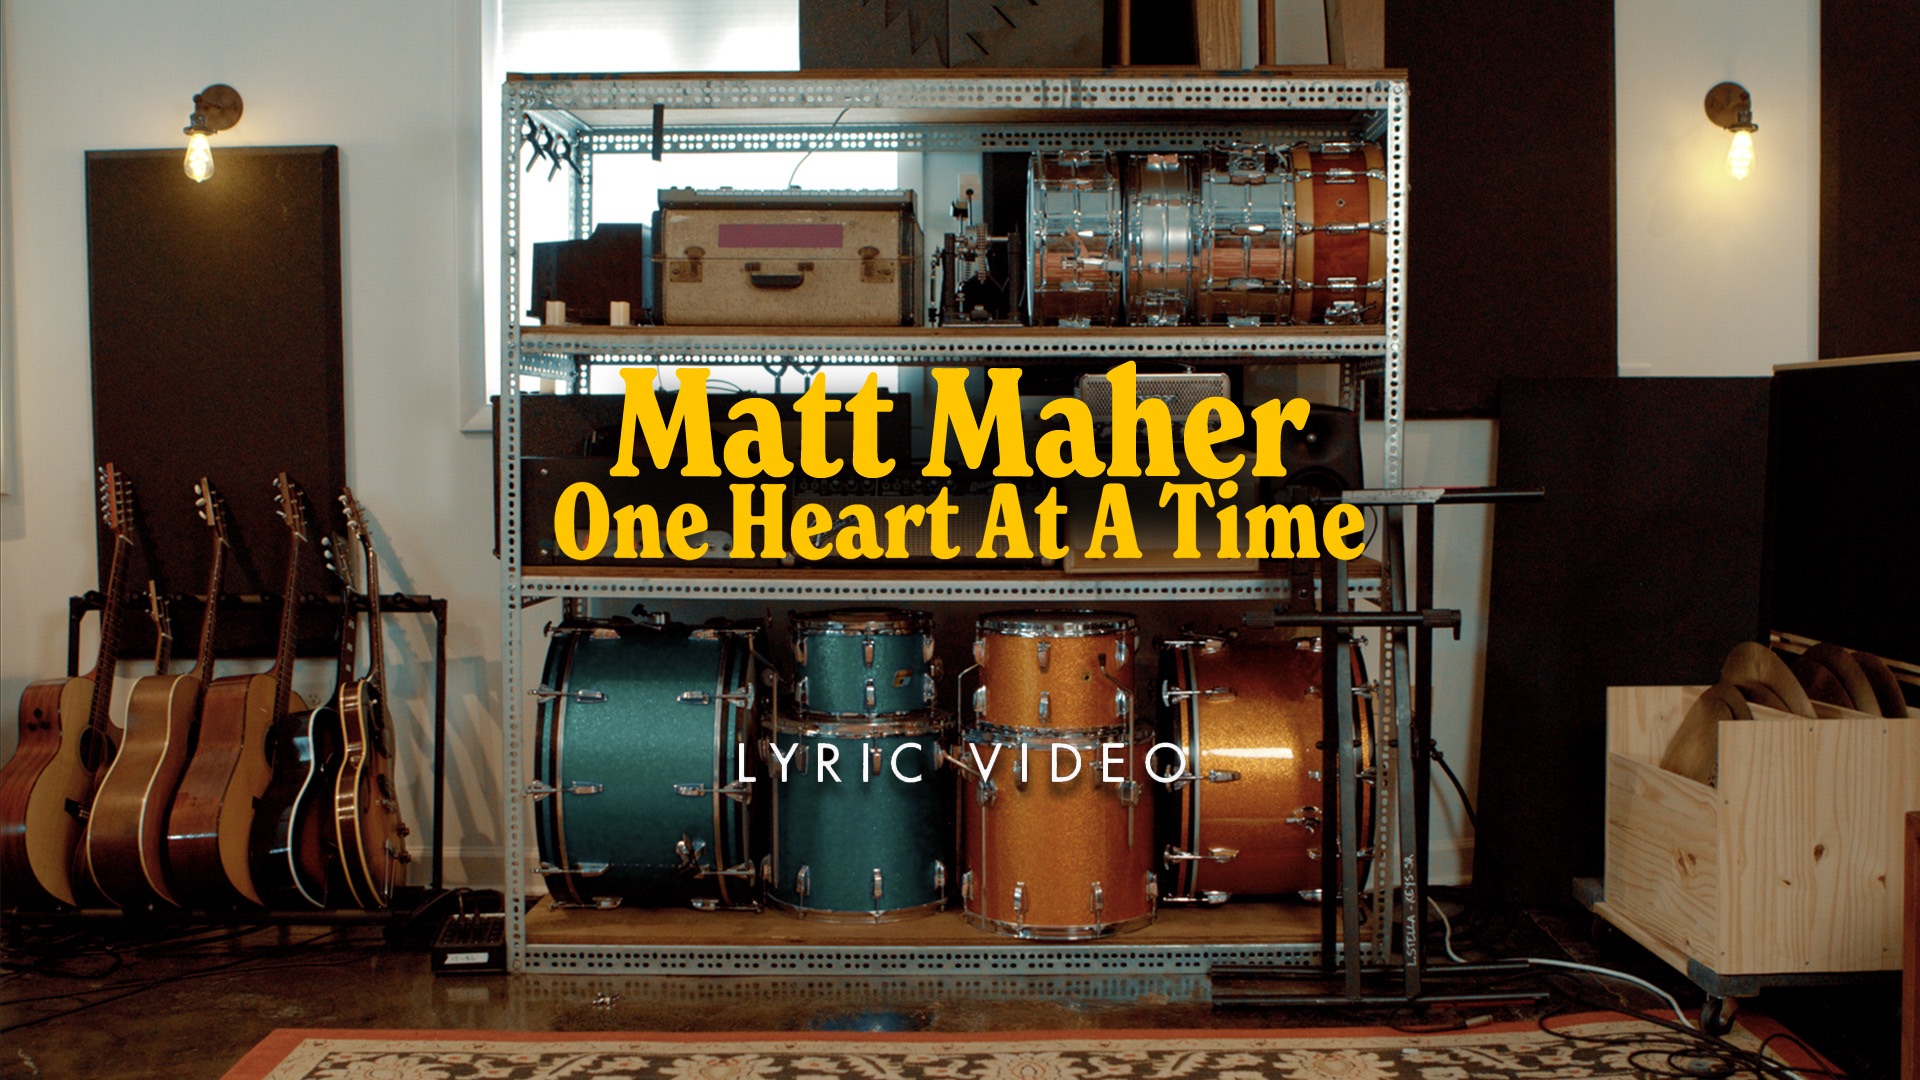 Your Love Defends Me (Acoustic) - Music Video by Matt Maher - Apple Music